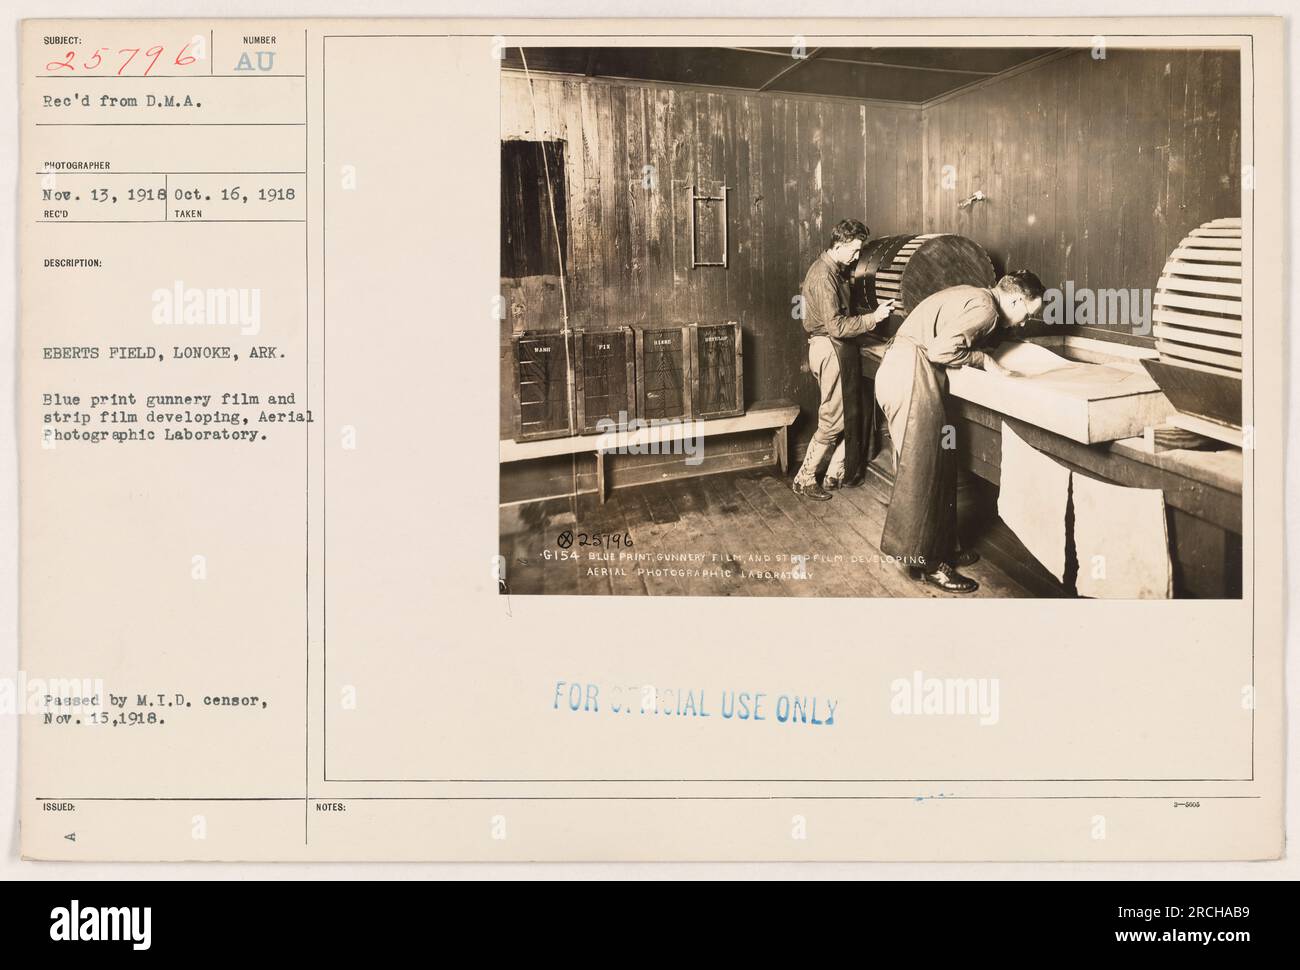 Image taken on October 16, 1918 at Eberts Field, Lonoke, Ark, showing the process of blue print gunnery film and strip film developing at the Aerial Photographic Laboratory. The image was reviewed and passed by the M.I.D censor on November 15, 1918, and was labeled for official use only. Stock Photo